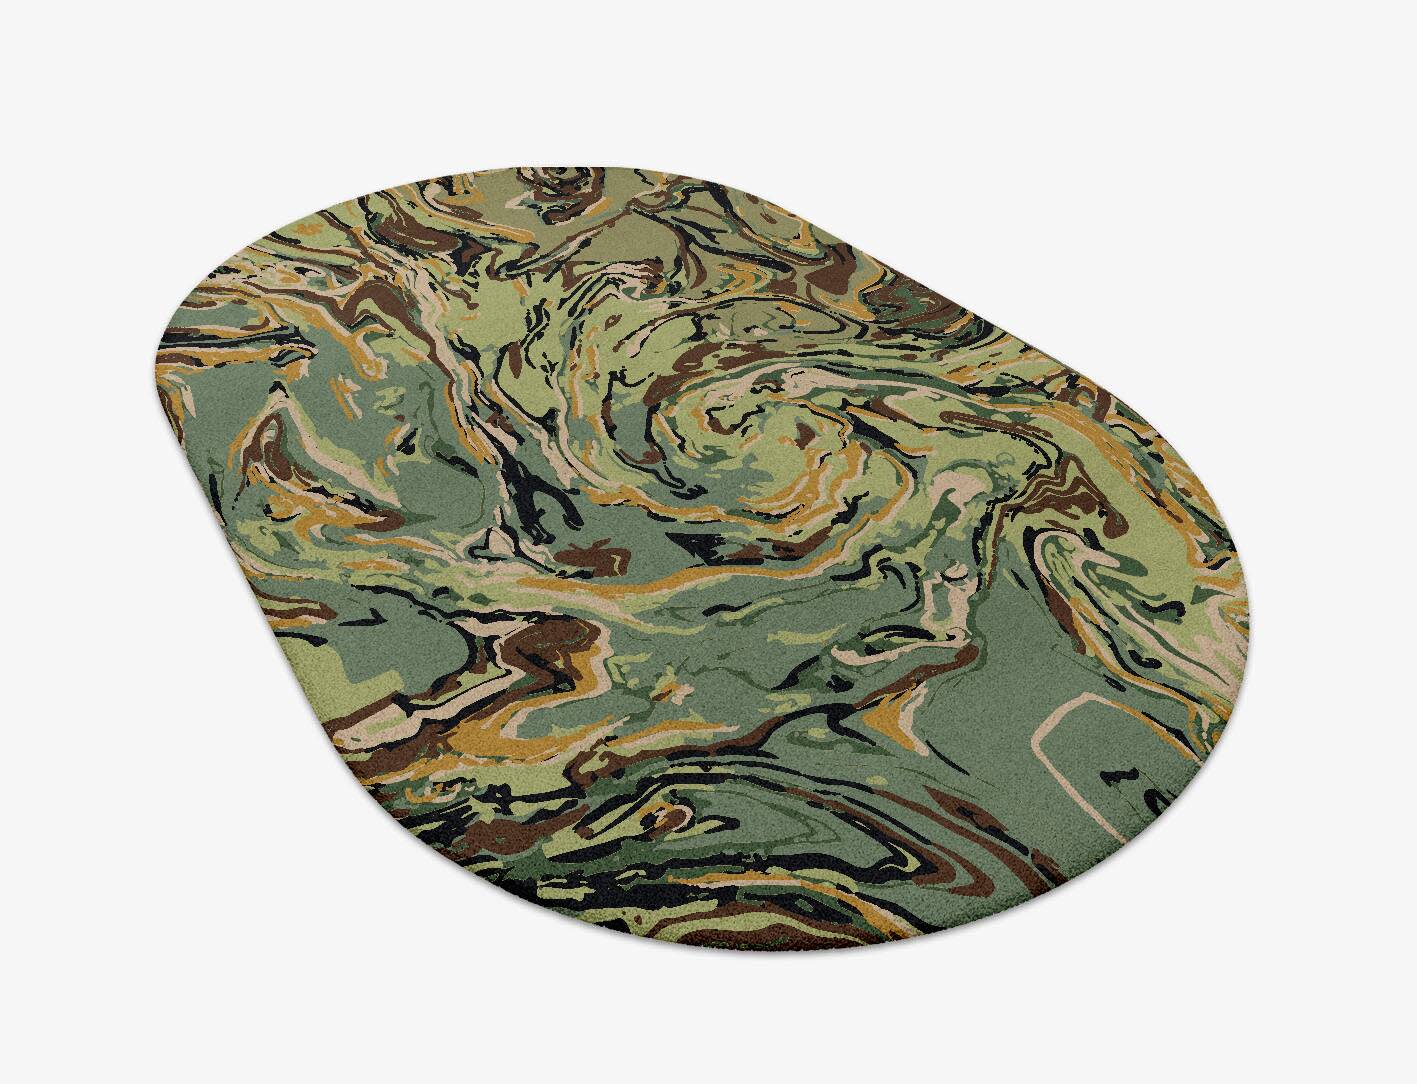 Whirly-8 Abstract Capsule Hand Tufted Pure Wool Custom Rug by Rug Artisan